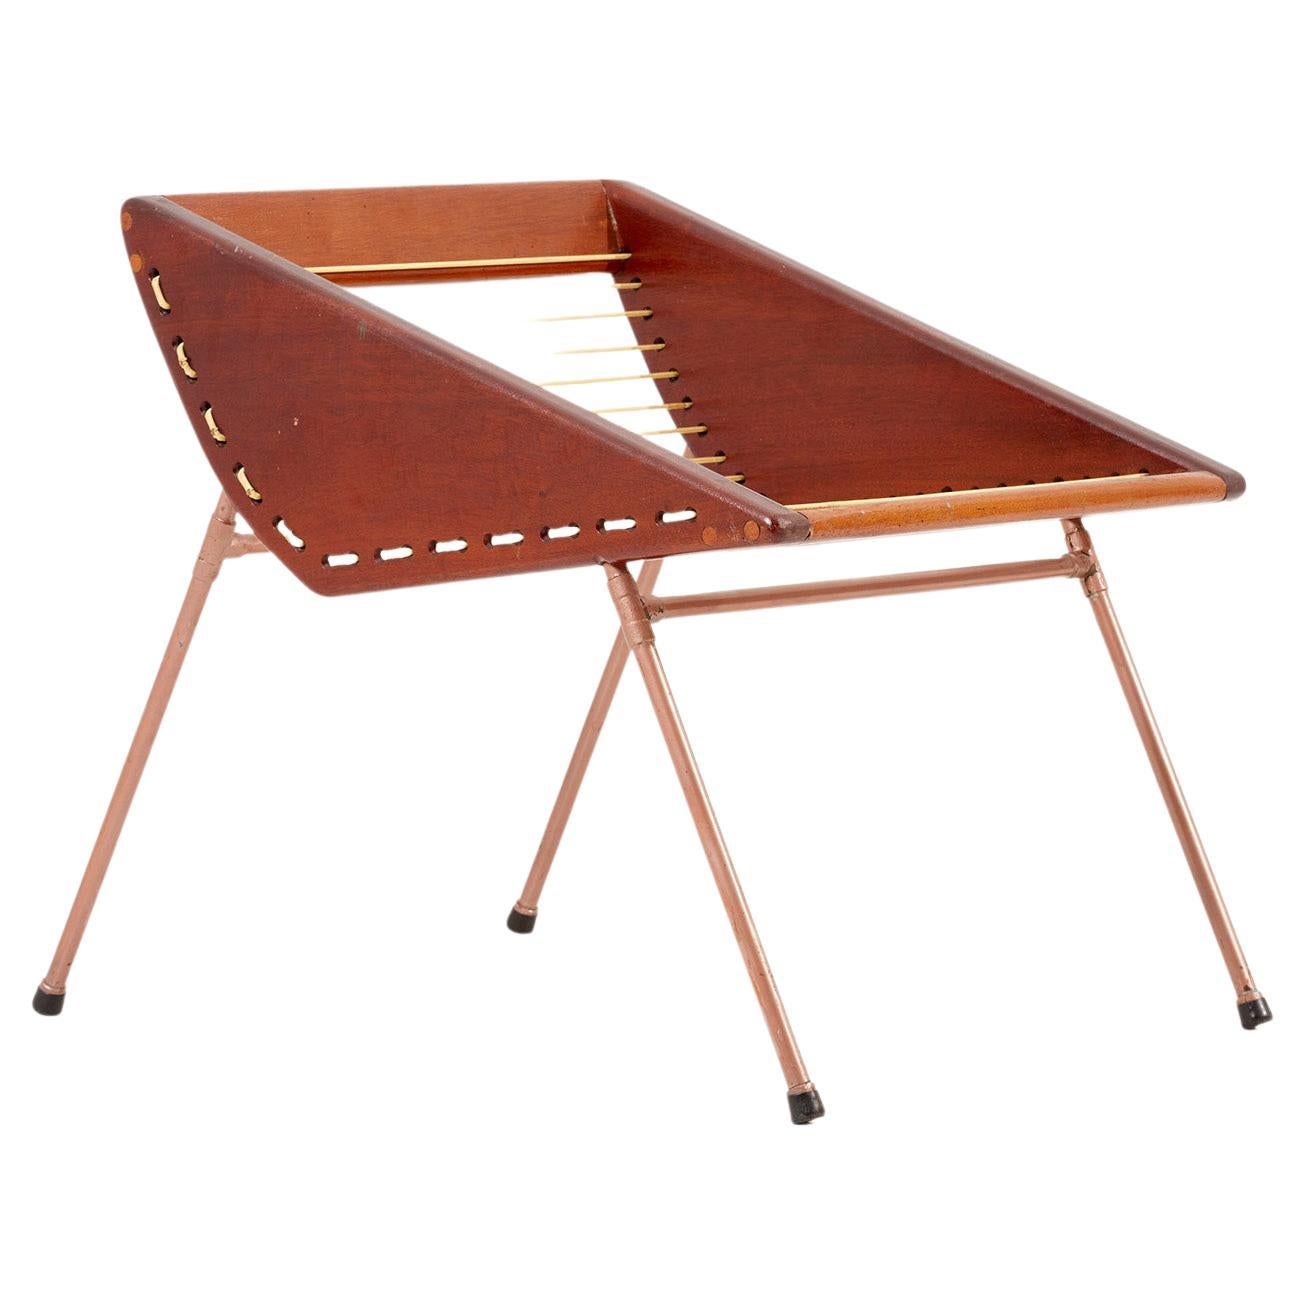 Unique Diy Mid Century Studio Stool with Copper Pipes and Webbing, USA, 1960s For Sale